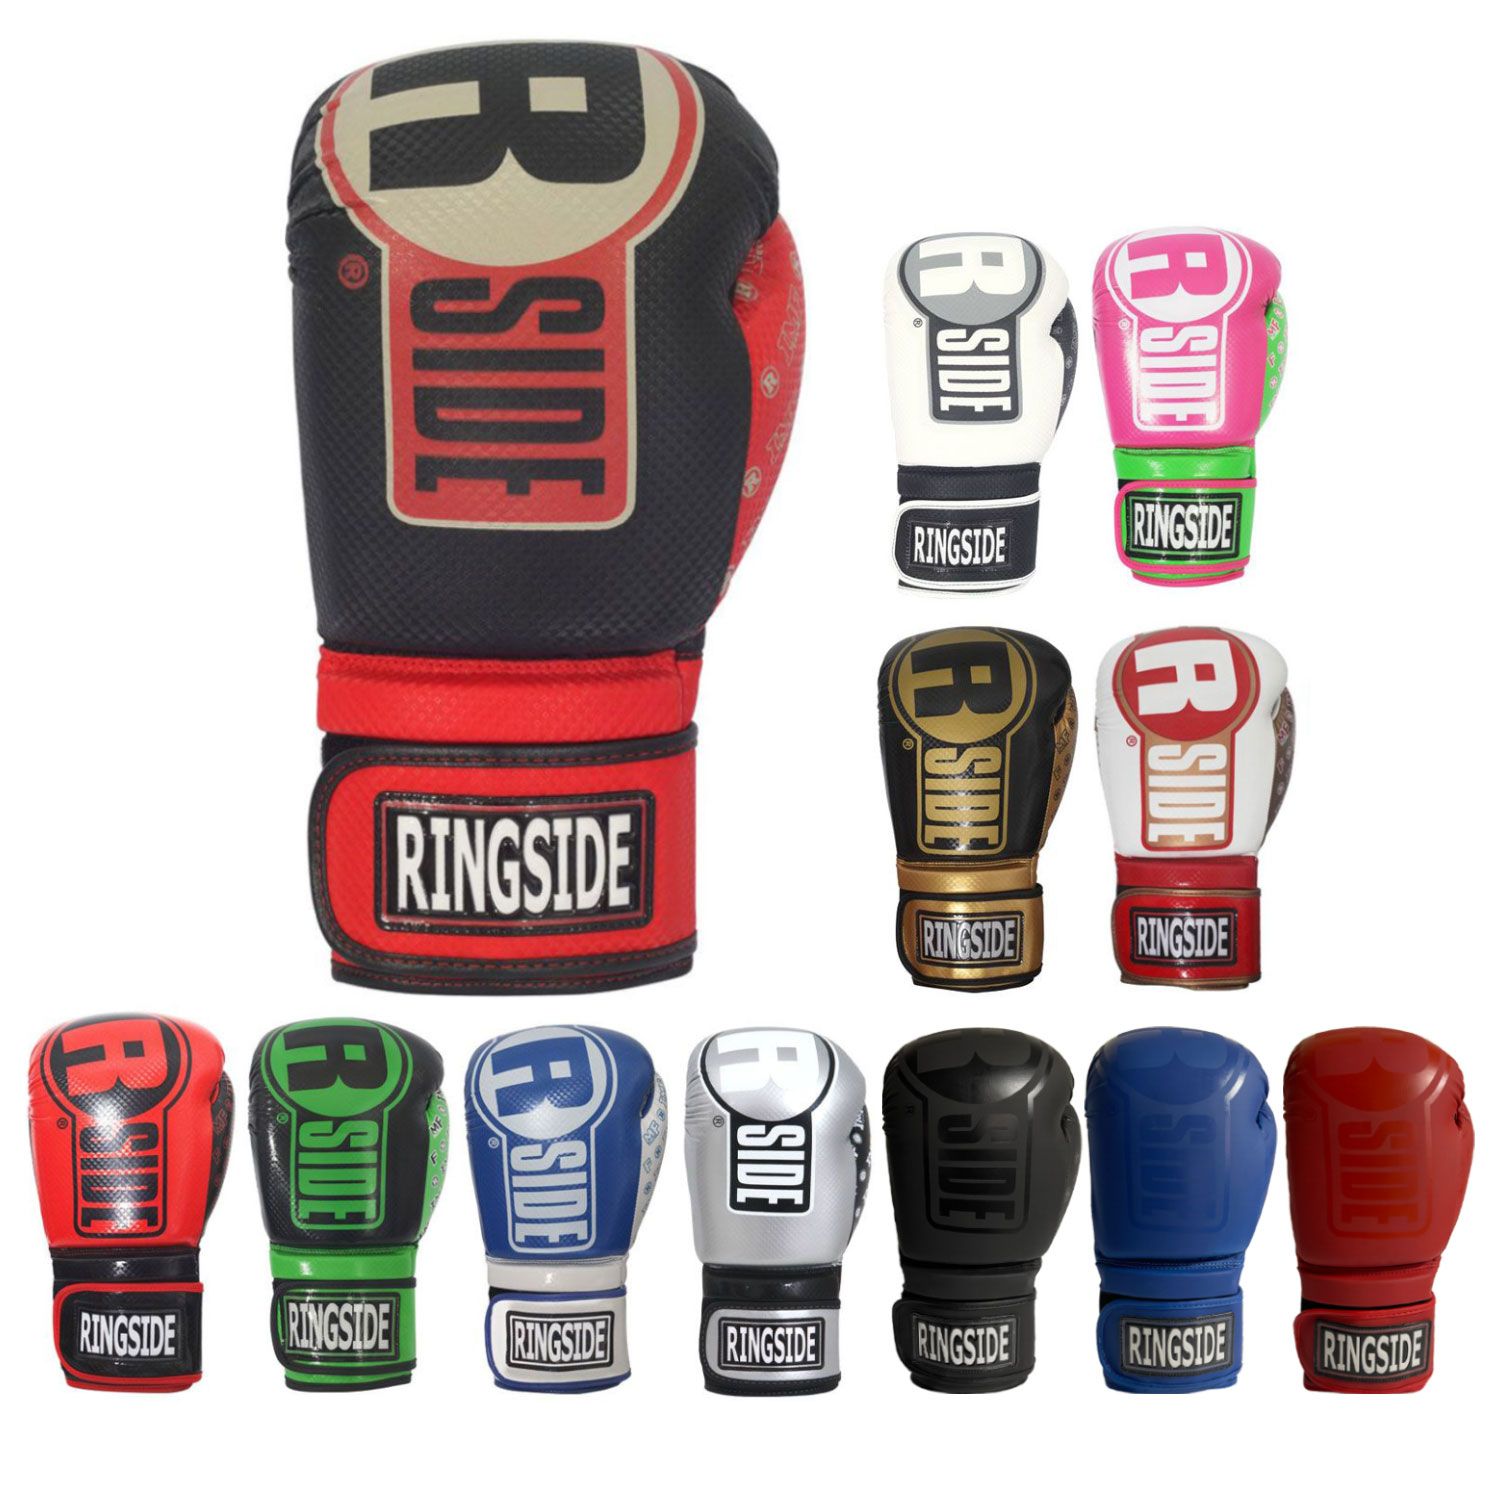 Ringside Apex Flash Sparring Gloves |FItness Experience